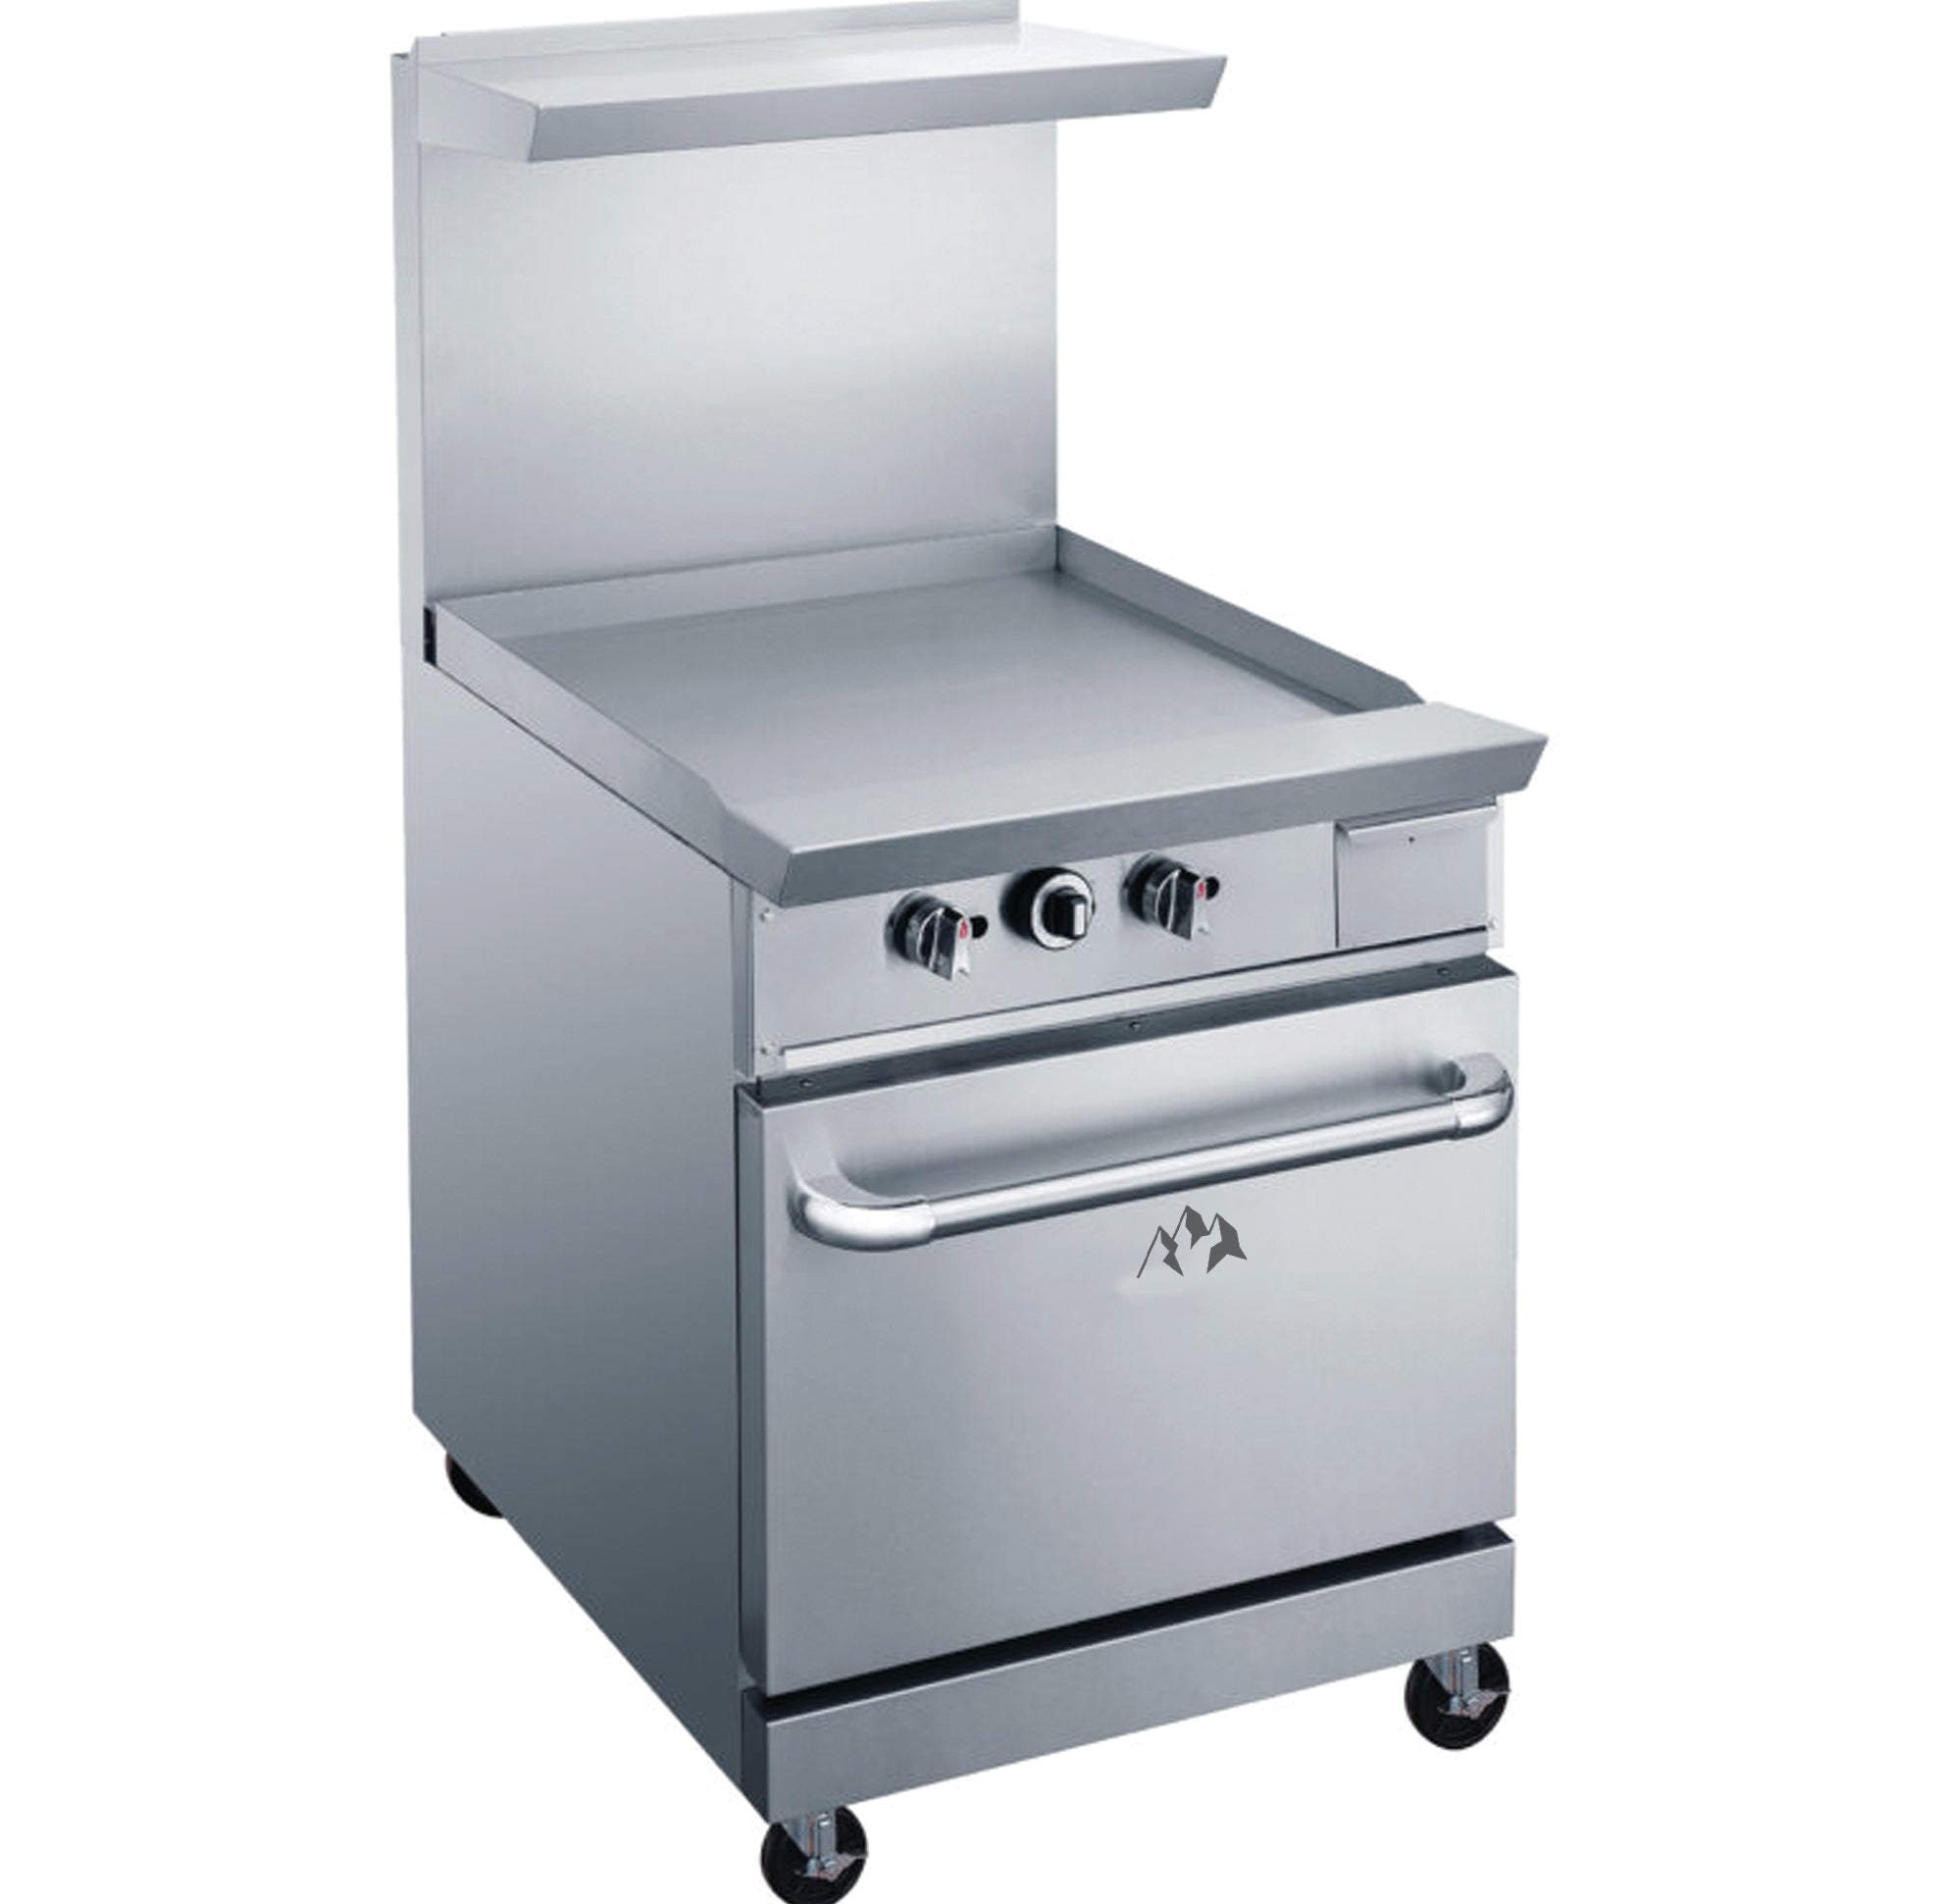 Chef AAA - TCR24-GM, Commercial 24" Oven Range 24" Griddle Natural Gas